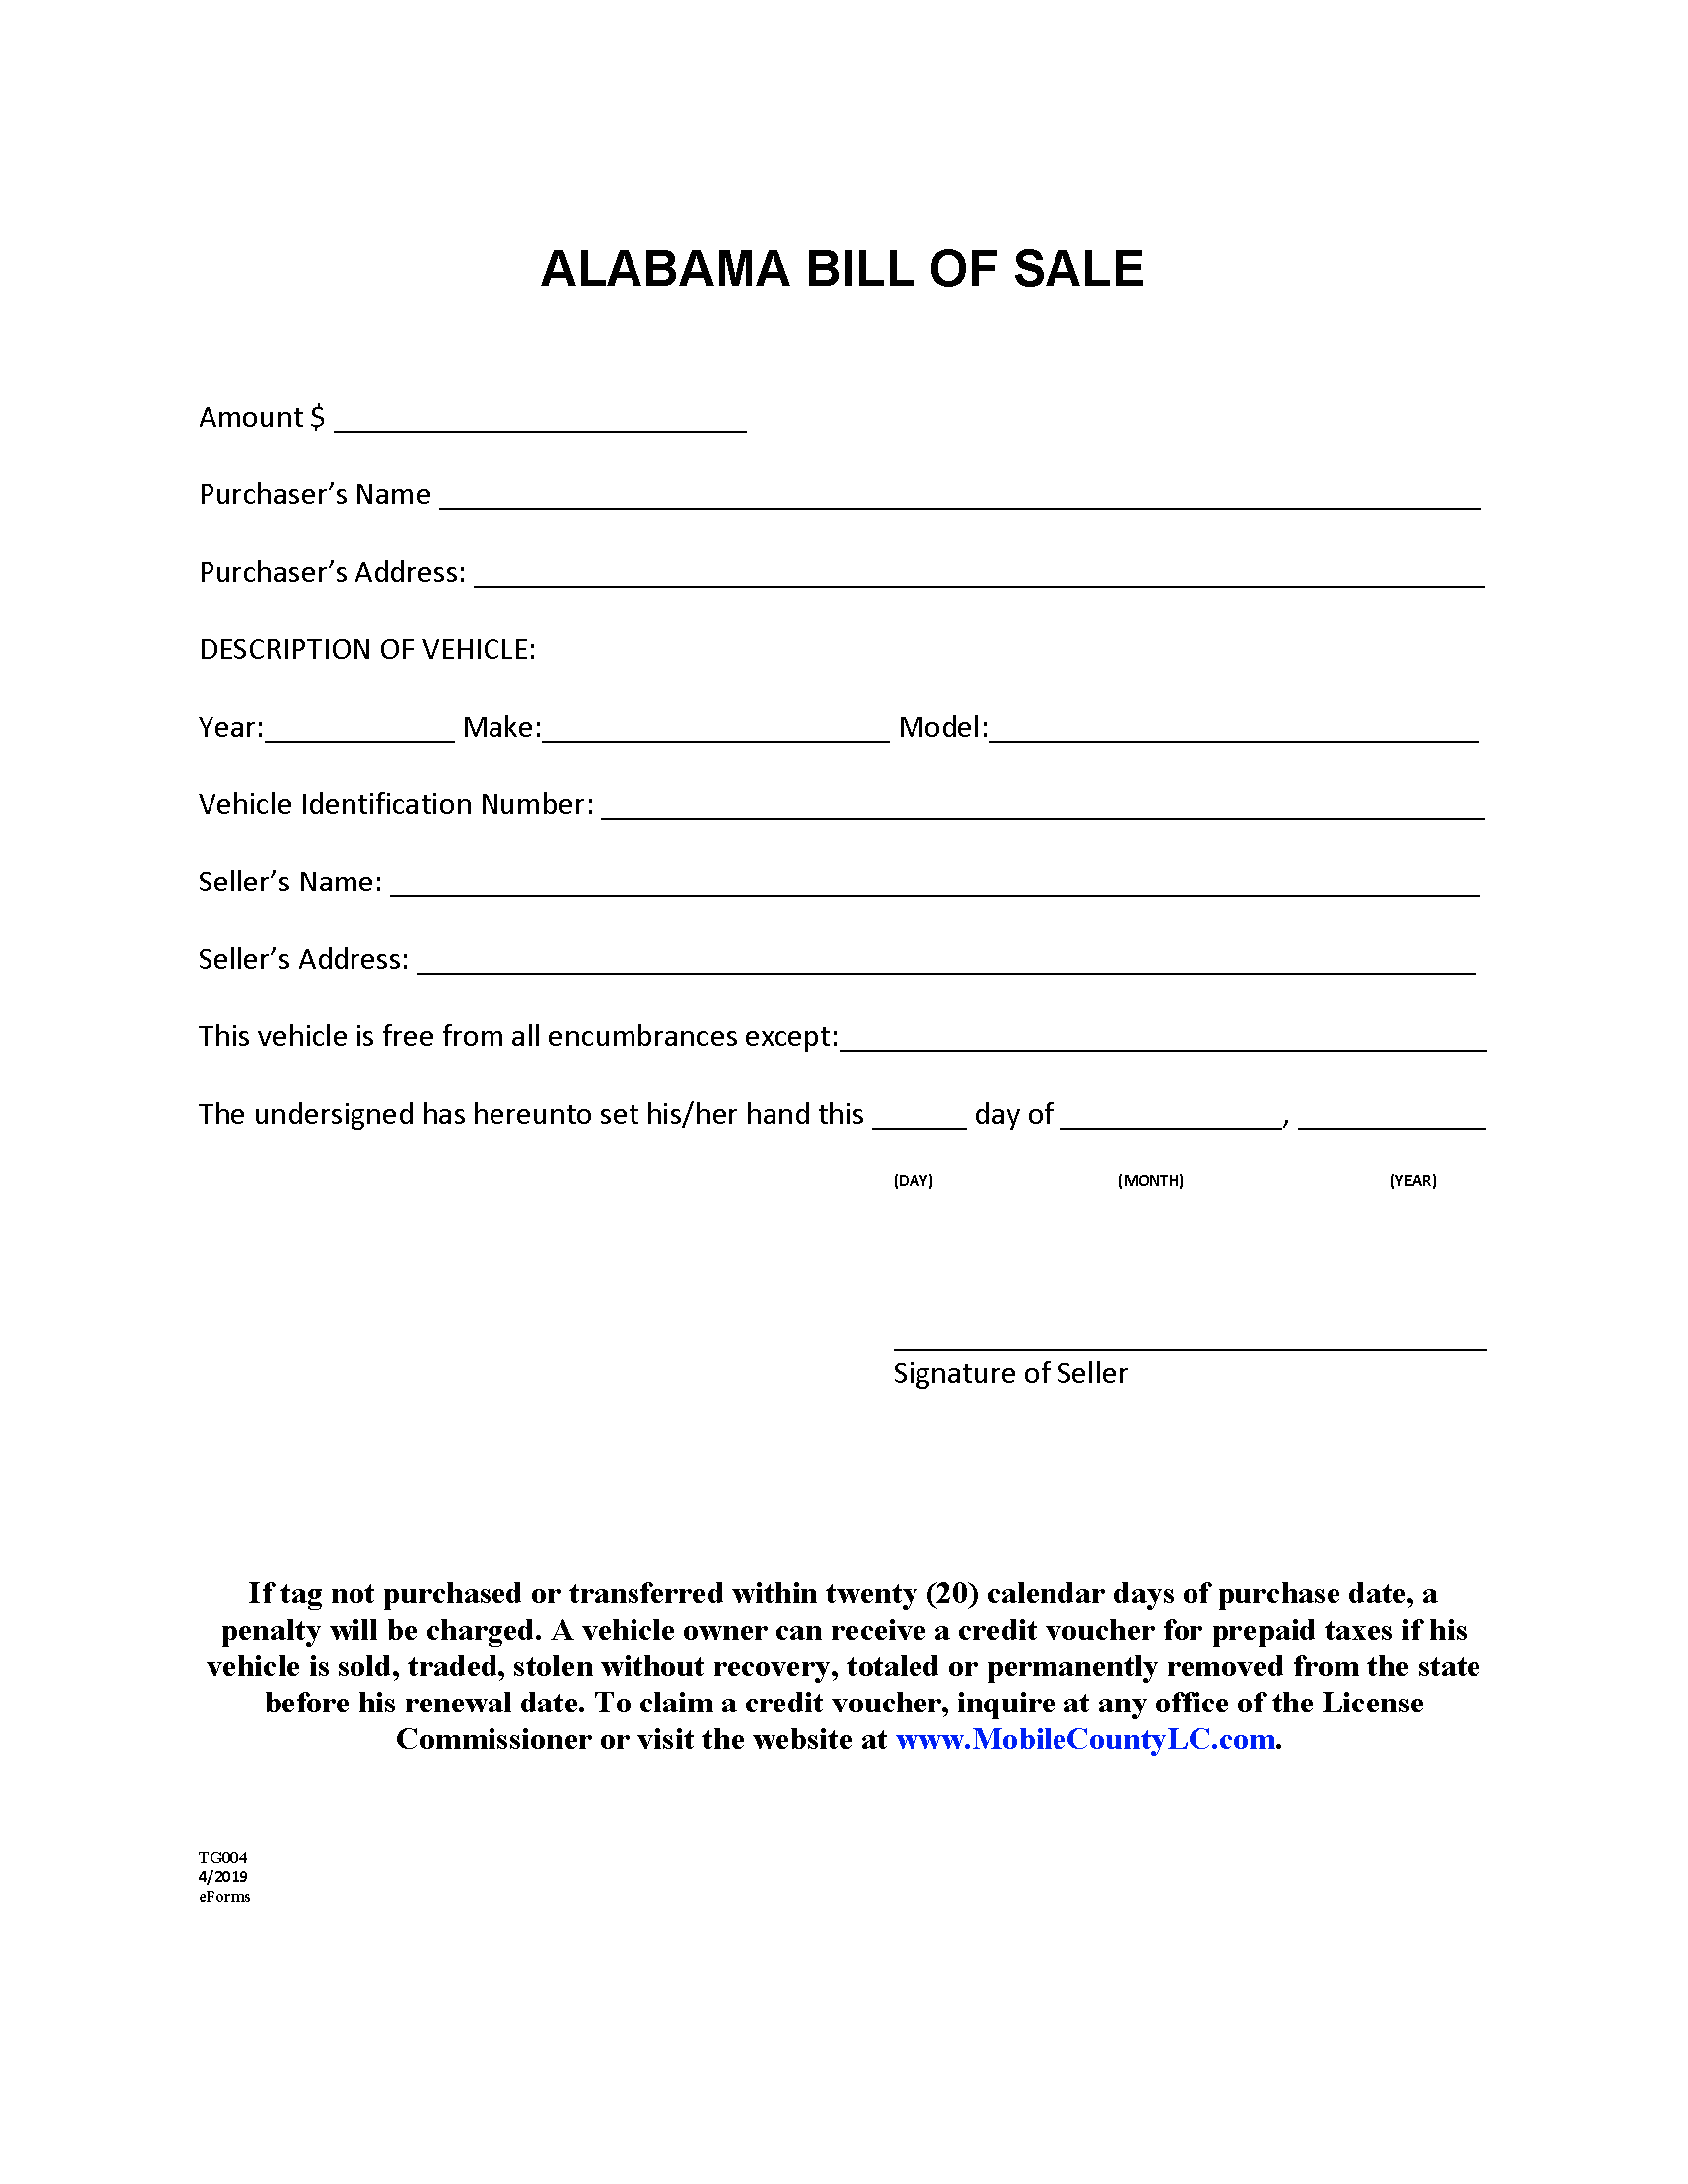 Alabama Vehicle Bill Of Sale Fill Online Printable Fillable Blank My Xxx Hot Girl 0567